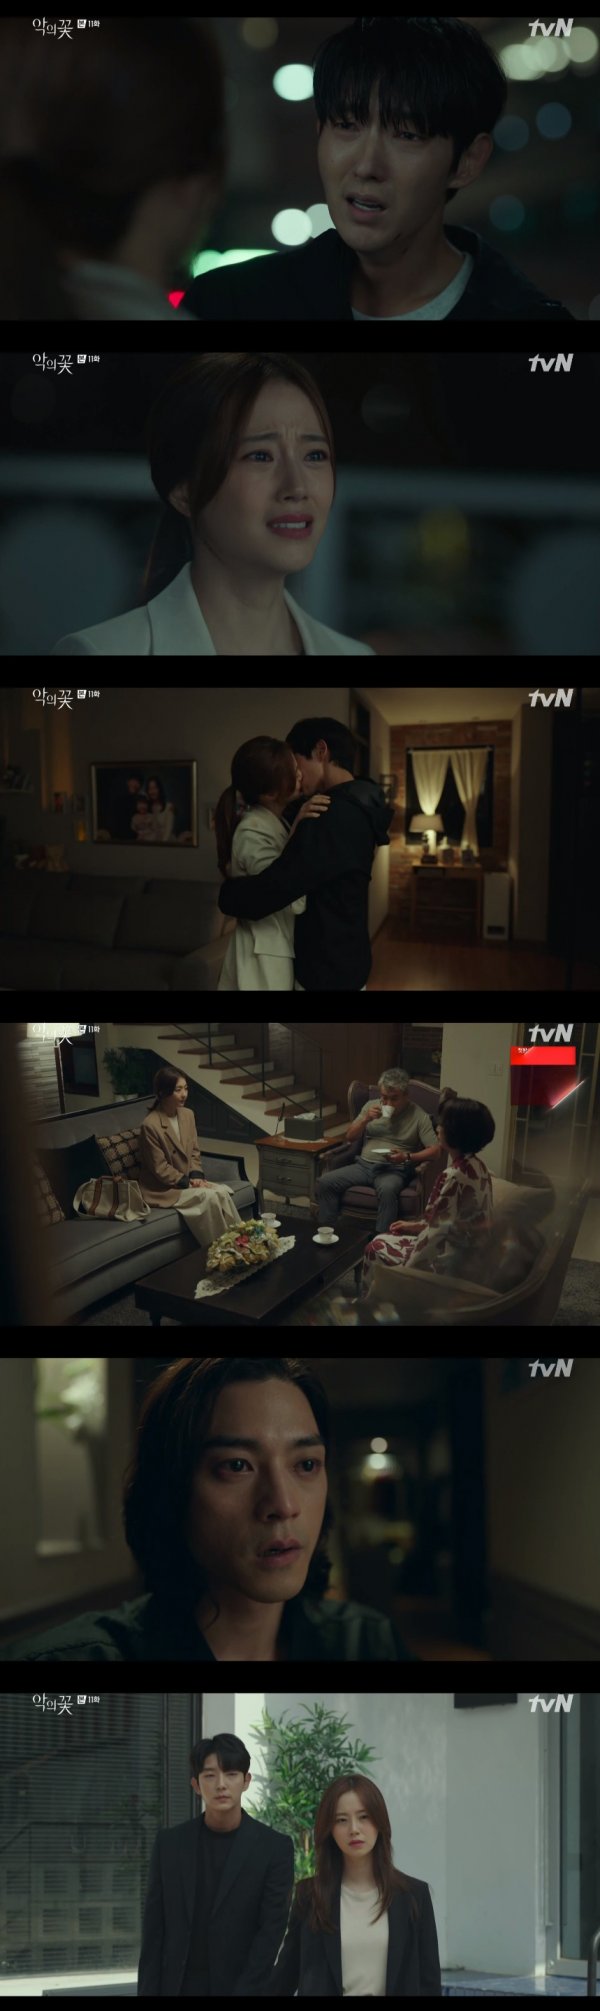 In TVNs Drama Flower of Evil, Lee Joon-gi and Moon Chae-wons love was swept up with a creepy Reversal story.On this day, Do Hyun-soo (Lee Joon-gi) and Cha JiWon (Moon Chae-won) finally faced the truth that they crouched.The relationship between the two people who chose to be with each other finally became evil, but eventually it became love.At the same time, the identity of Baek Hee-sung (Kim Ji-hoon), who was Mystery, was revealed as Accomplice of Do Min-seok (Choi Byung-mo), and the explosion to suspense, and the development without blinking with the melodrama was stirred.First, Cha JiWon asked his colleague, Detective Choi Jae-seop (Choi Young-joon), who learned about the secret of Do Hyun-soo, to I will prove him with my life and ask for an opportunity to reveal the truth himself.At that time, Do Hyun-soos plan to unveil the Accomplice of the Jennifer 8 case in Yeonju City and to work with the police to the human trafficking organization was in crisis as he was caught by the organization boss Yeom Sang-cheol (Kim Ki-moo).Just before Do Hyun-soo was tied up and lost his life, Detective Cha JiWon appeared to prevent Yeom Sang-cheol and put more sweat in his hands.The relief that she came to save Do Hyun-soo and the tension that she could not hide the fact that she knew the identity of Do Hyun-soo, the ambivalence between the drama and the drama spread at the same time.Do Hyun-soo was more confused by the appearance of Cha JiWon, who knew my identity but let go, but he struggled to avoid the police who were coming soon.Do Hyun-soo, who was running away, understood why Cha JiWon was acting hard and hurt, and his uncontrollable feelings were bouncing.In the end, Do Hyun-soo, who stood in front of Cha JiWon again, burst into tears for the first time, saying, Im sorry.This was the moment when he had expressed the emotion that was in him, though he had not thought that no one had told him.Do Hyun-soo asked Cha JiWon for forgiveness, who knew everything but believed, and she also cried tears without hesitation, saying, I just had to do it.The two, who knew that they could no longer return to their happy daily lives, hugged each other in silence and kissed each other sadly.In addition, Do Hyun-soo confided in my real life that I had hidden in the meantime, and I made a deep echo to Cha JiWon with a confession of I love you but with a heartfelt heart.The TVN drama The Flower of Evil, which is a high-density emotional tracking drama of two people facing the truth that they want to ignore, is broadcast on the special broadcast of 10:50 pm on the 3rd (Thursday) night, and the 12th broadcast on the 9th (Wednesday) at 10:50 pm.Photo Offering: Video capture of TVN Tree Drama 